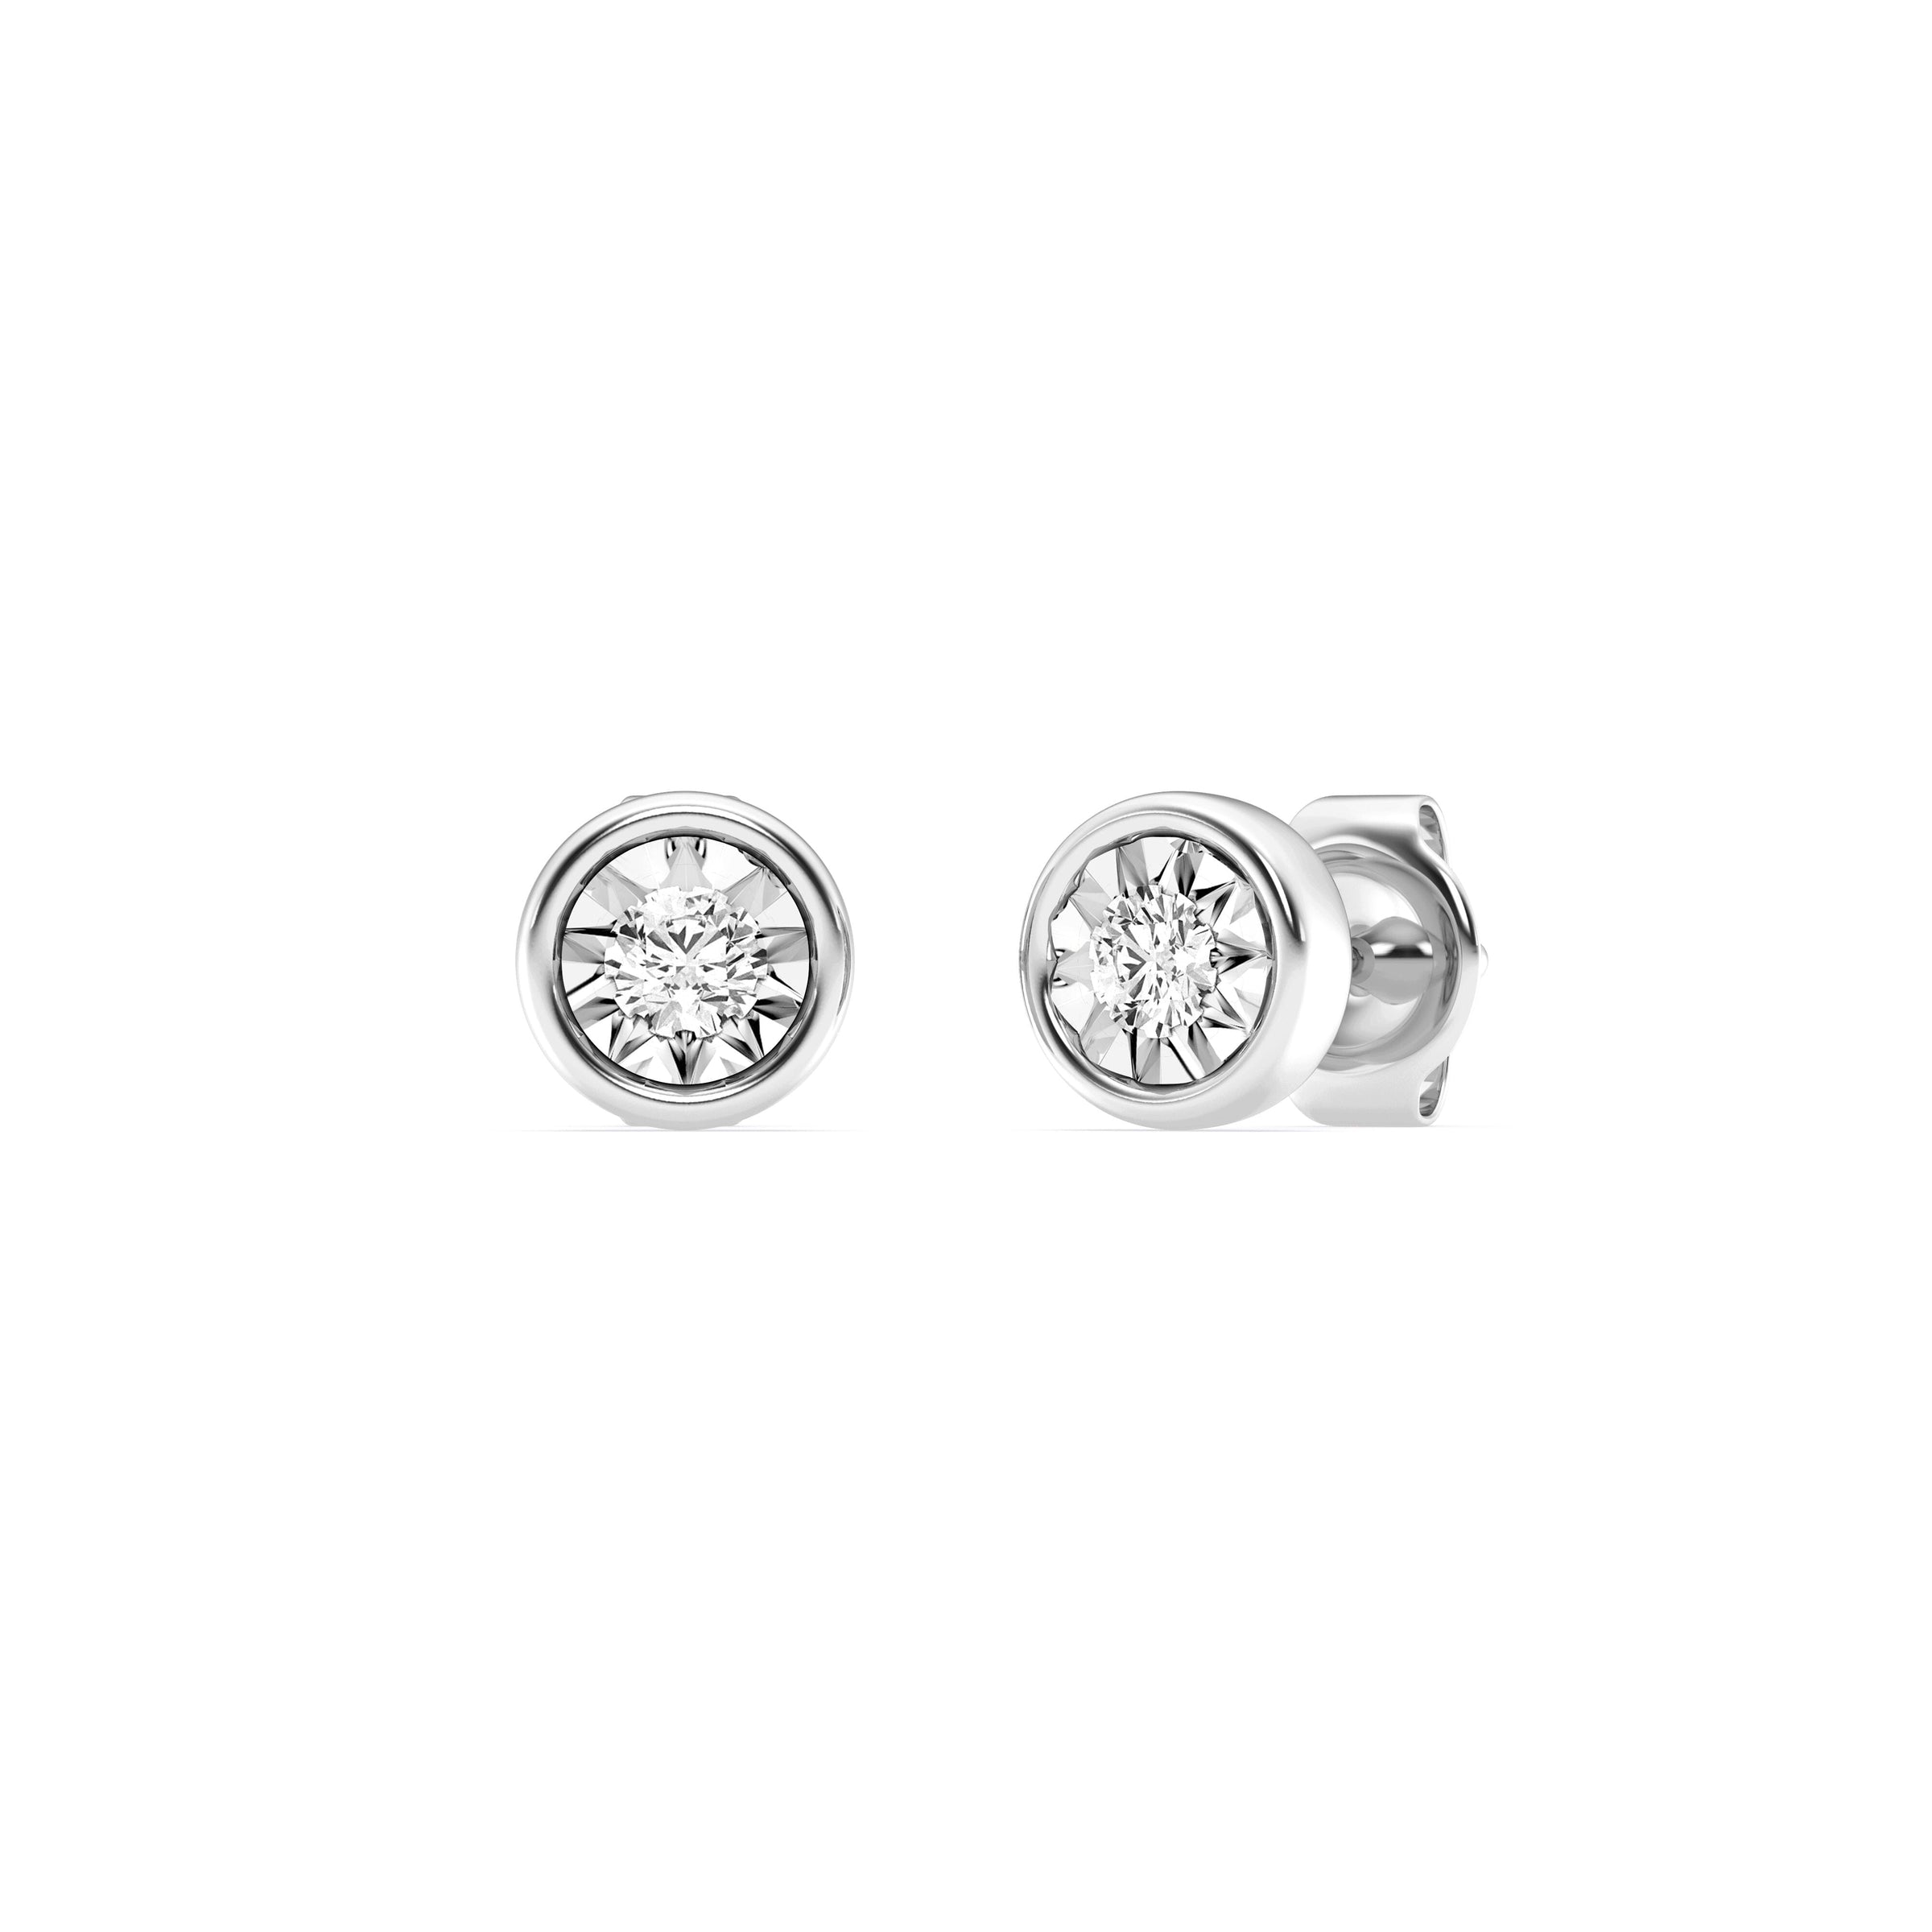 Mirage Stud Earrings with 0.30ct of Laboratory Grown Diamonds in Sterling Silver and Platinum Earrings Bevilles 